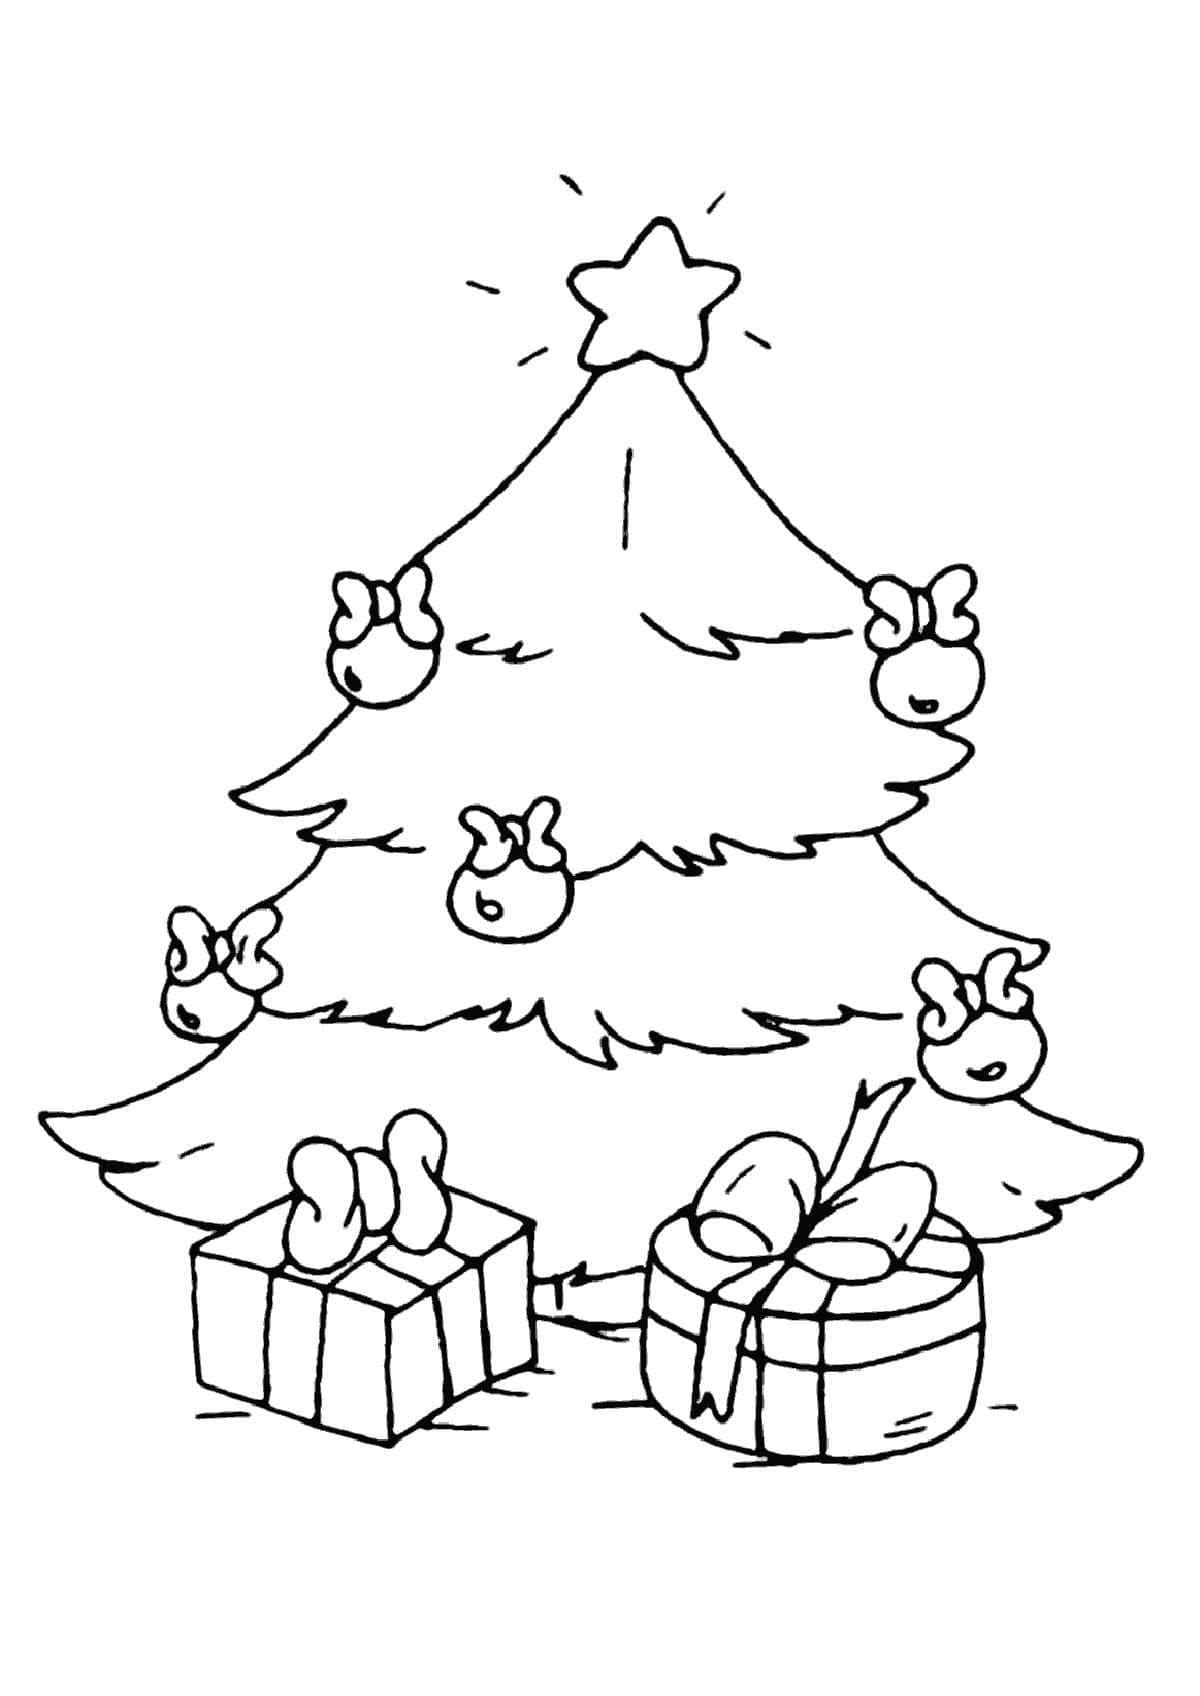 Gifts Are Hidden Under The Green Fluffy Tree Coloring Page